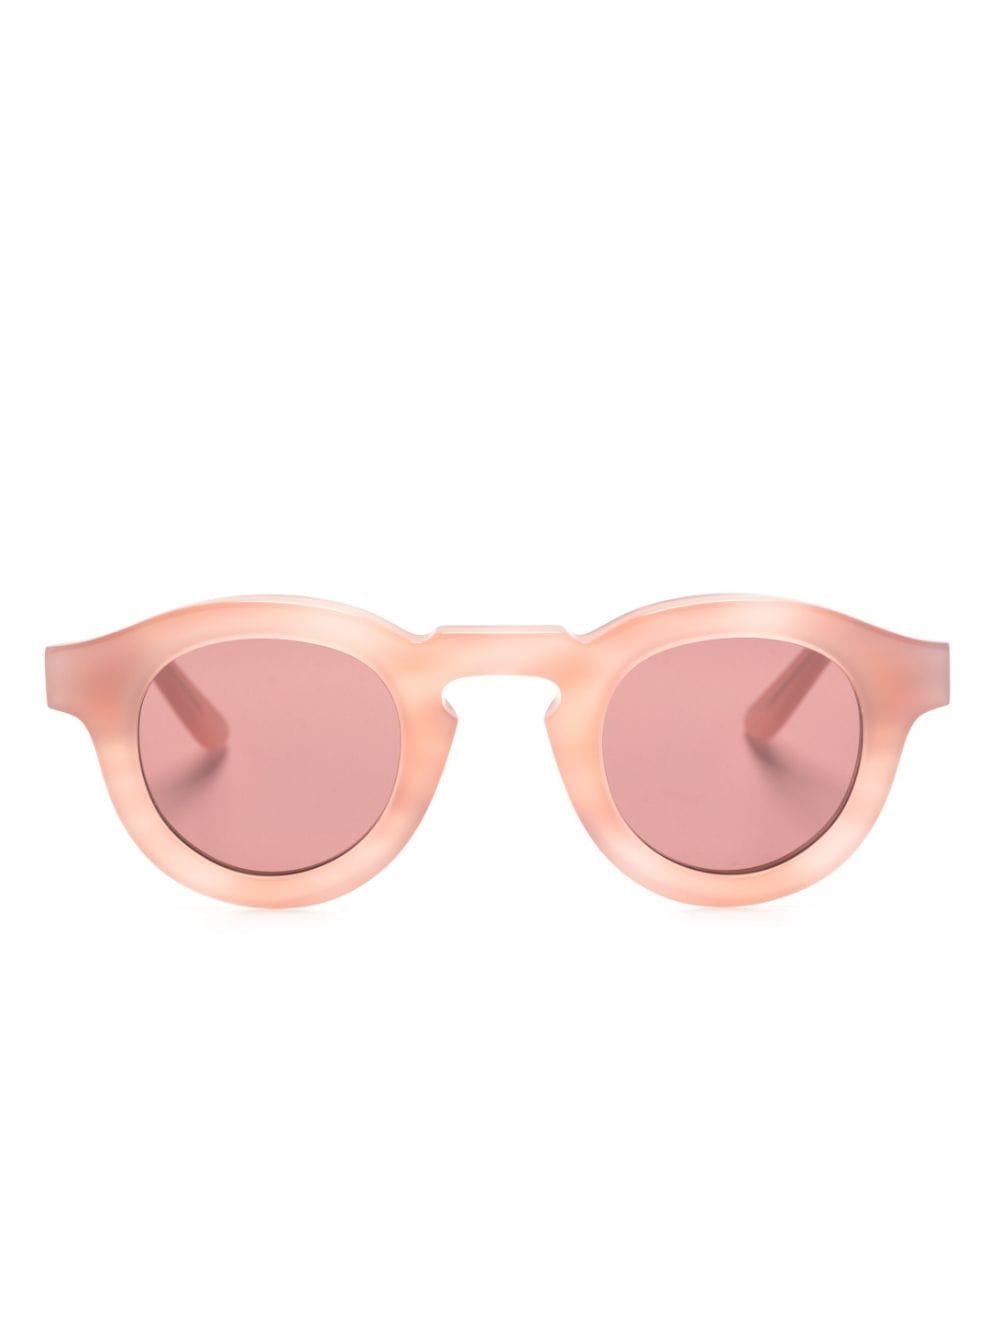 Thierry Lasry Maskoffy pantos-frame sunglasses - Pink von Thierry Lasry